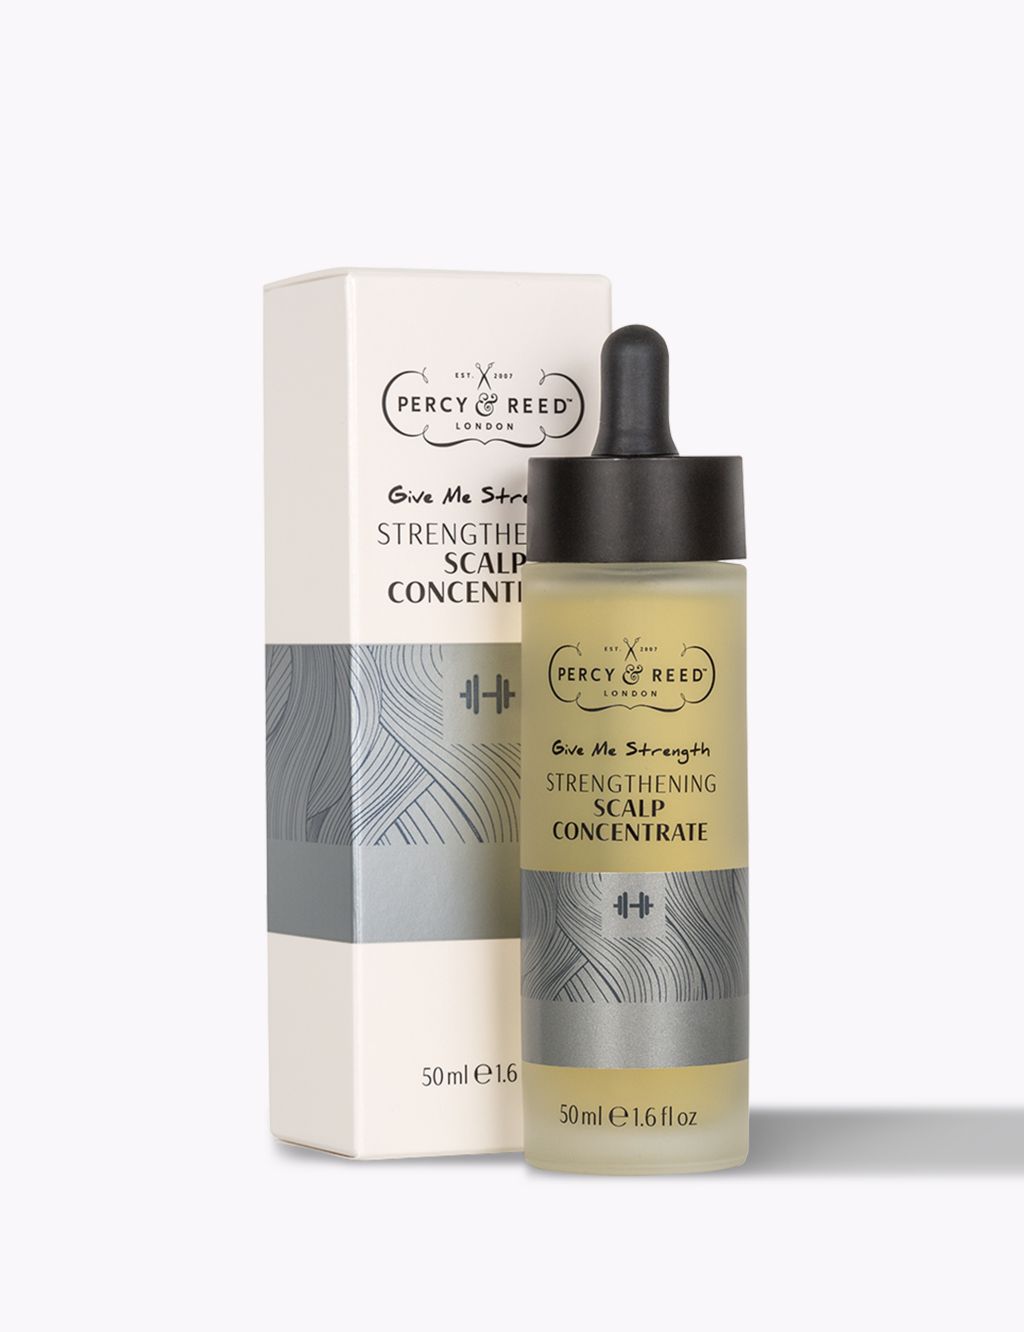 Give Me Strength Strengthening Scalp Concentrate 50ml